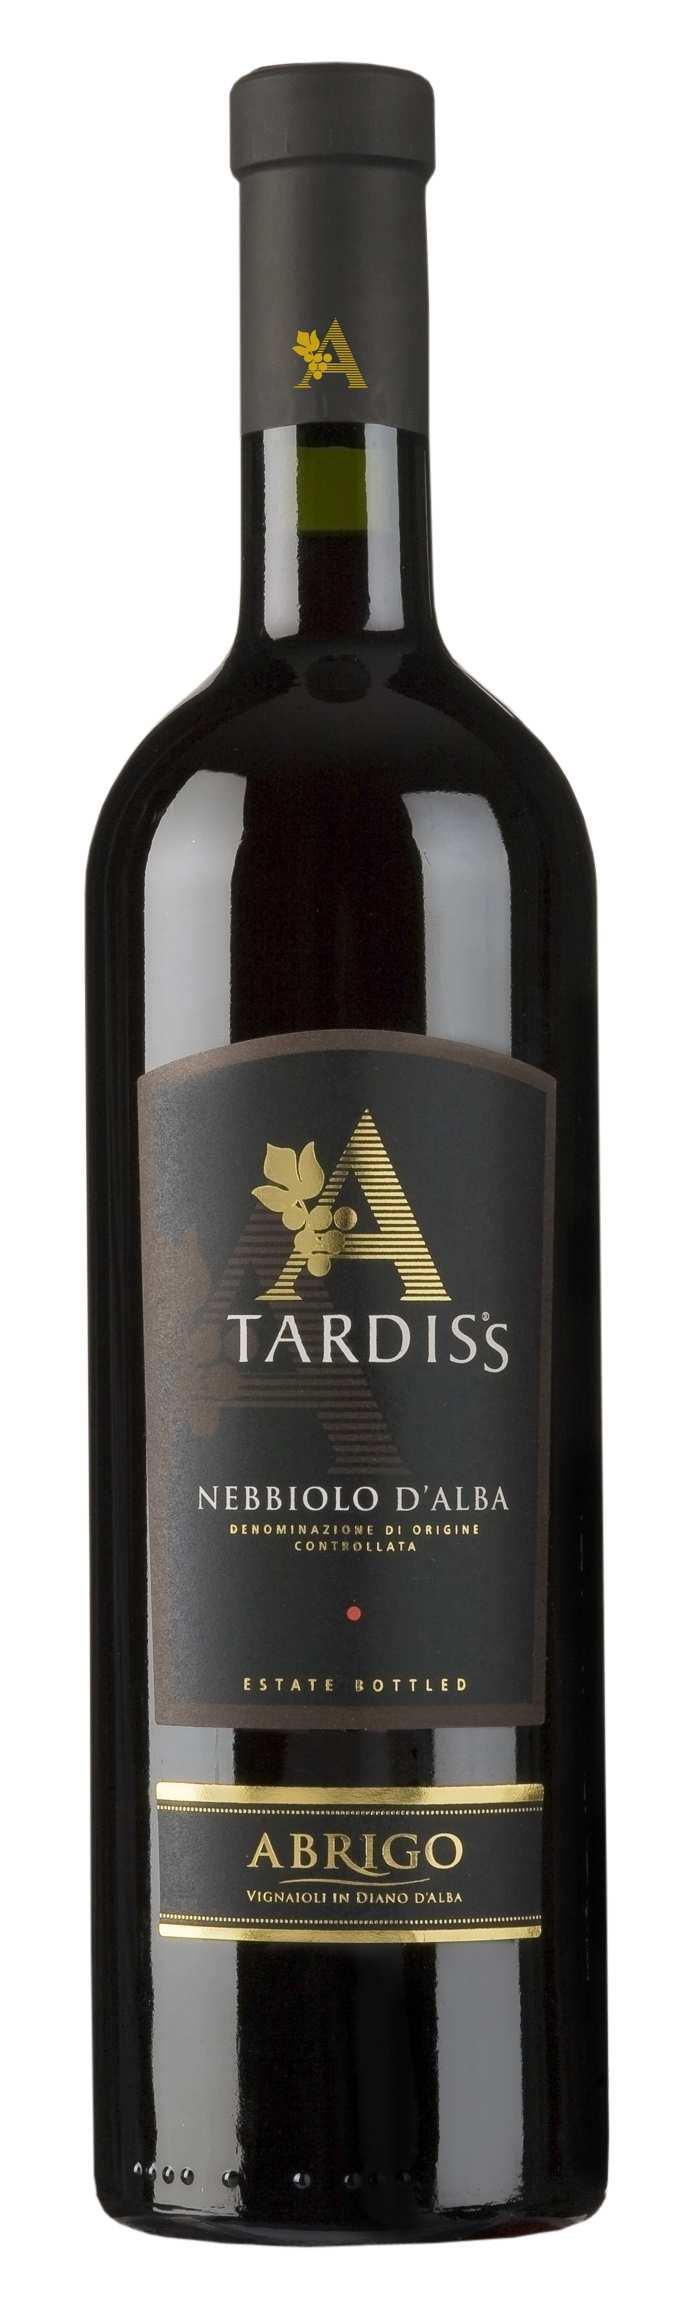 NEBBIOLO D ALBA DOC TARDISS IT IS THE LAST WINE THAT LEAVES THE CELLAR, ITS LONG AGEING WILL MAKE YOU FEEL THE FULL EXPRESSION OF ITS FEATURES.